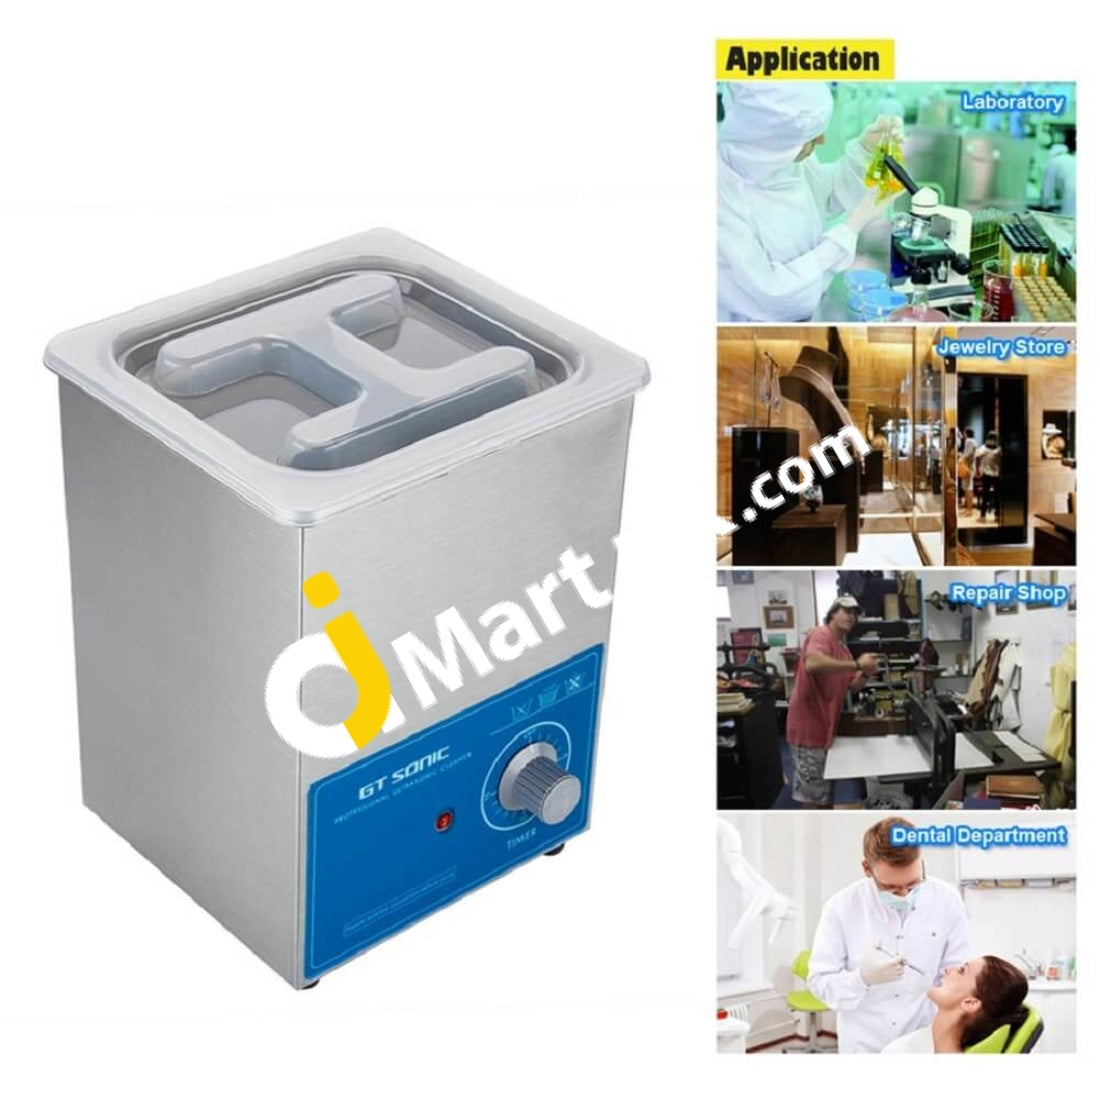 Gt Sonic 2L Ultrasonic Cleaner With Adjustable Timer Ideal For Jewelleries Medical Equipments